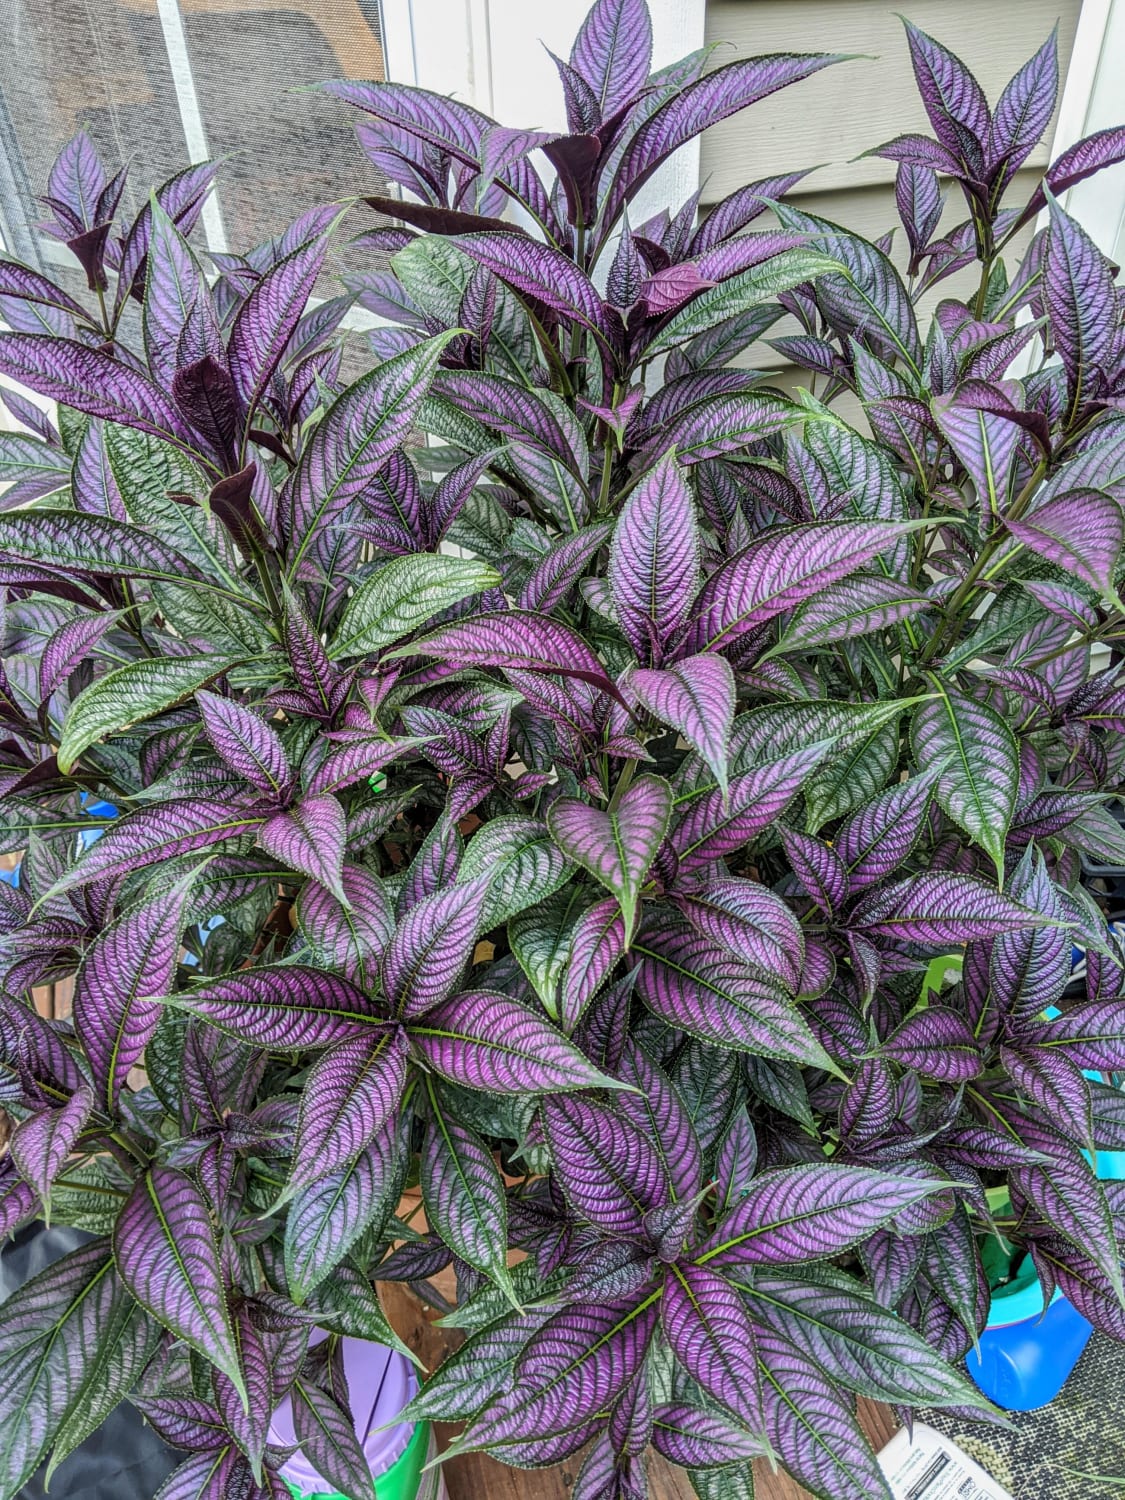 I've never seen purple as stunning as Persian Shield elsewhere